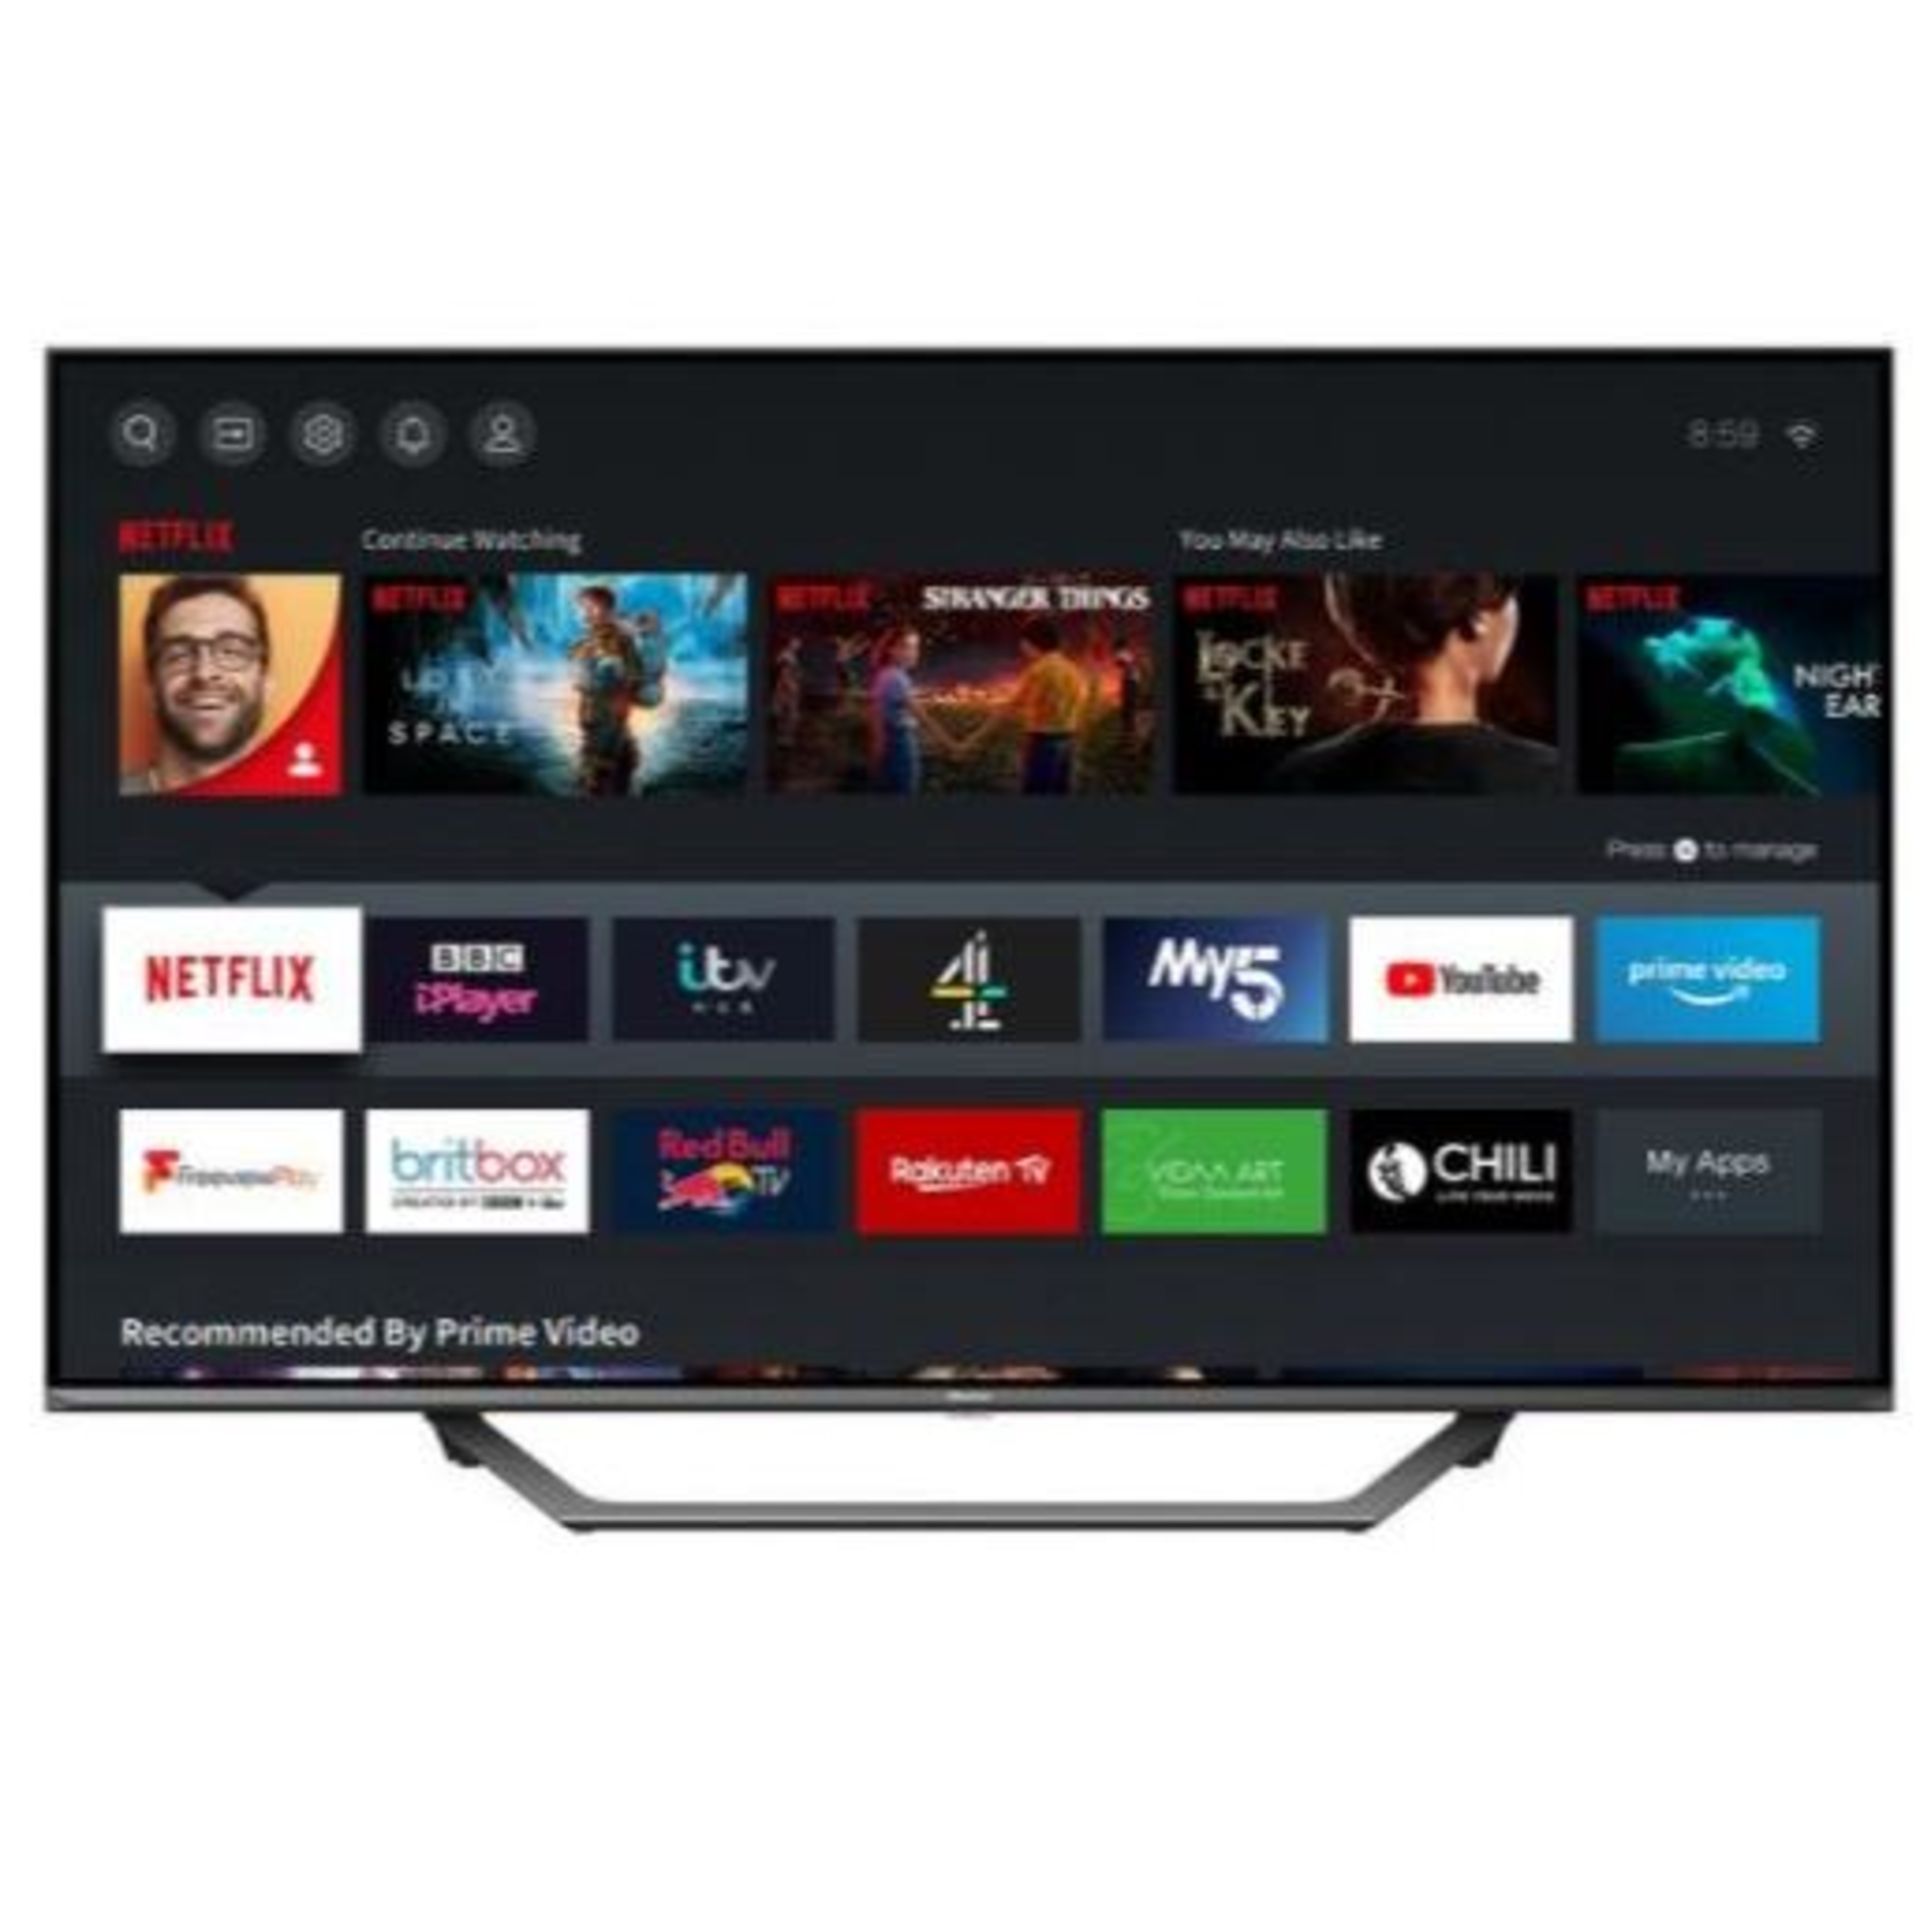 1 BOXED HISENSE 65AE7400FTUK (2020) LED HDR 4K ULTRA HD SMART TV, 65 INCH WITH FREEVIEW PLAY